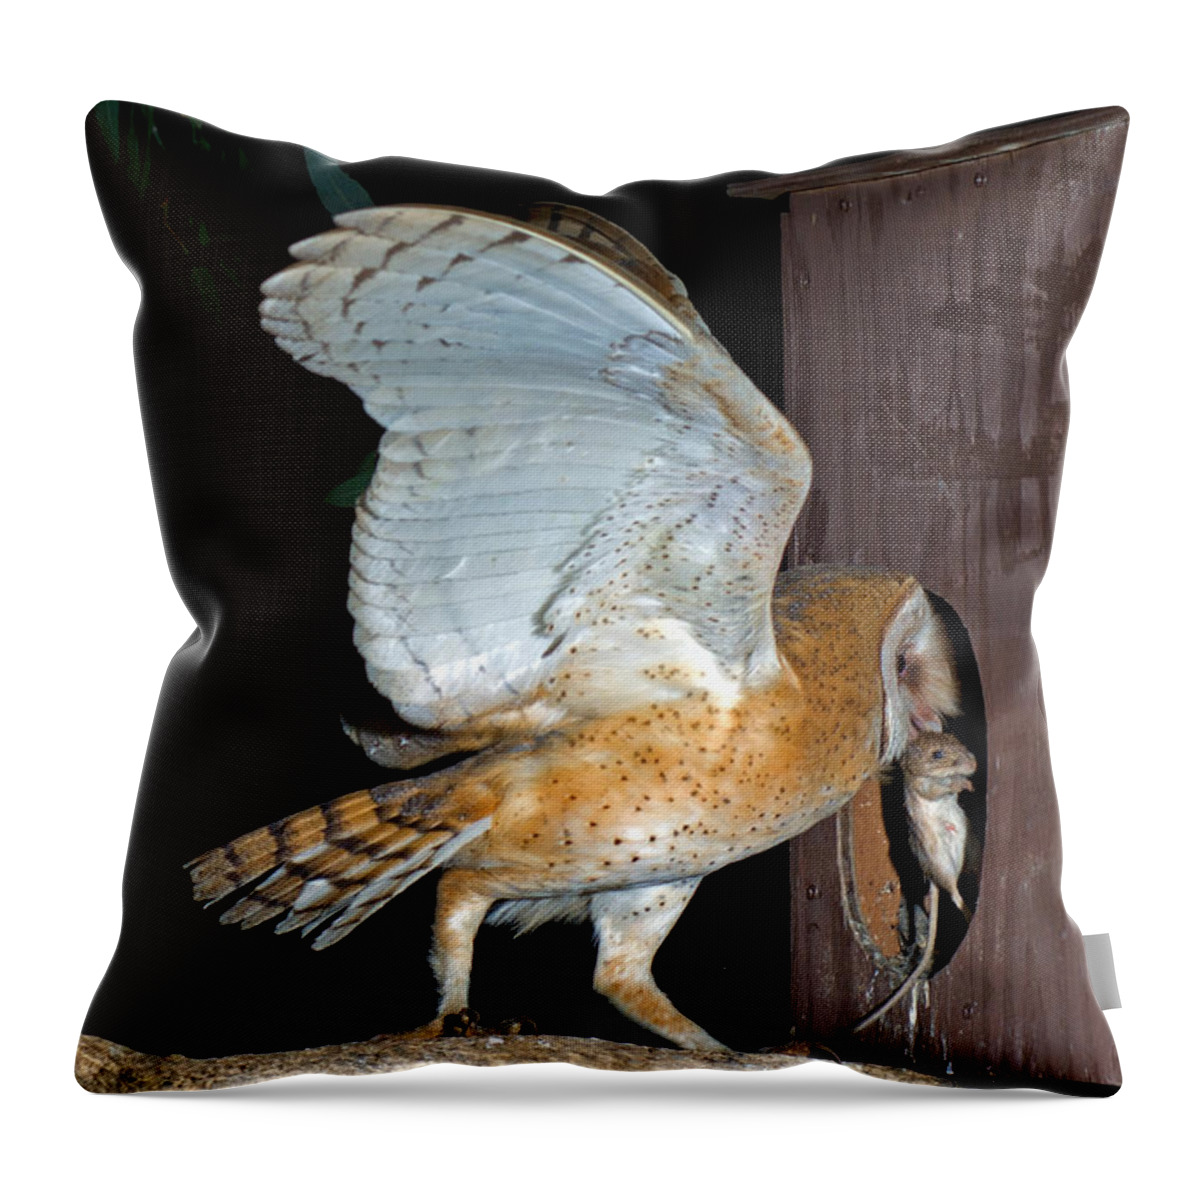 Barn Owl Throw Pillow featuring the photograph Barn Owl With Rat by Anthony Mercieca